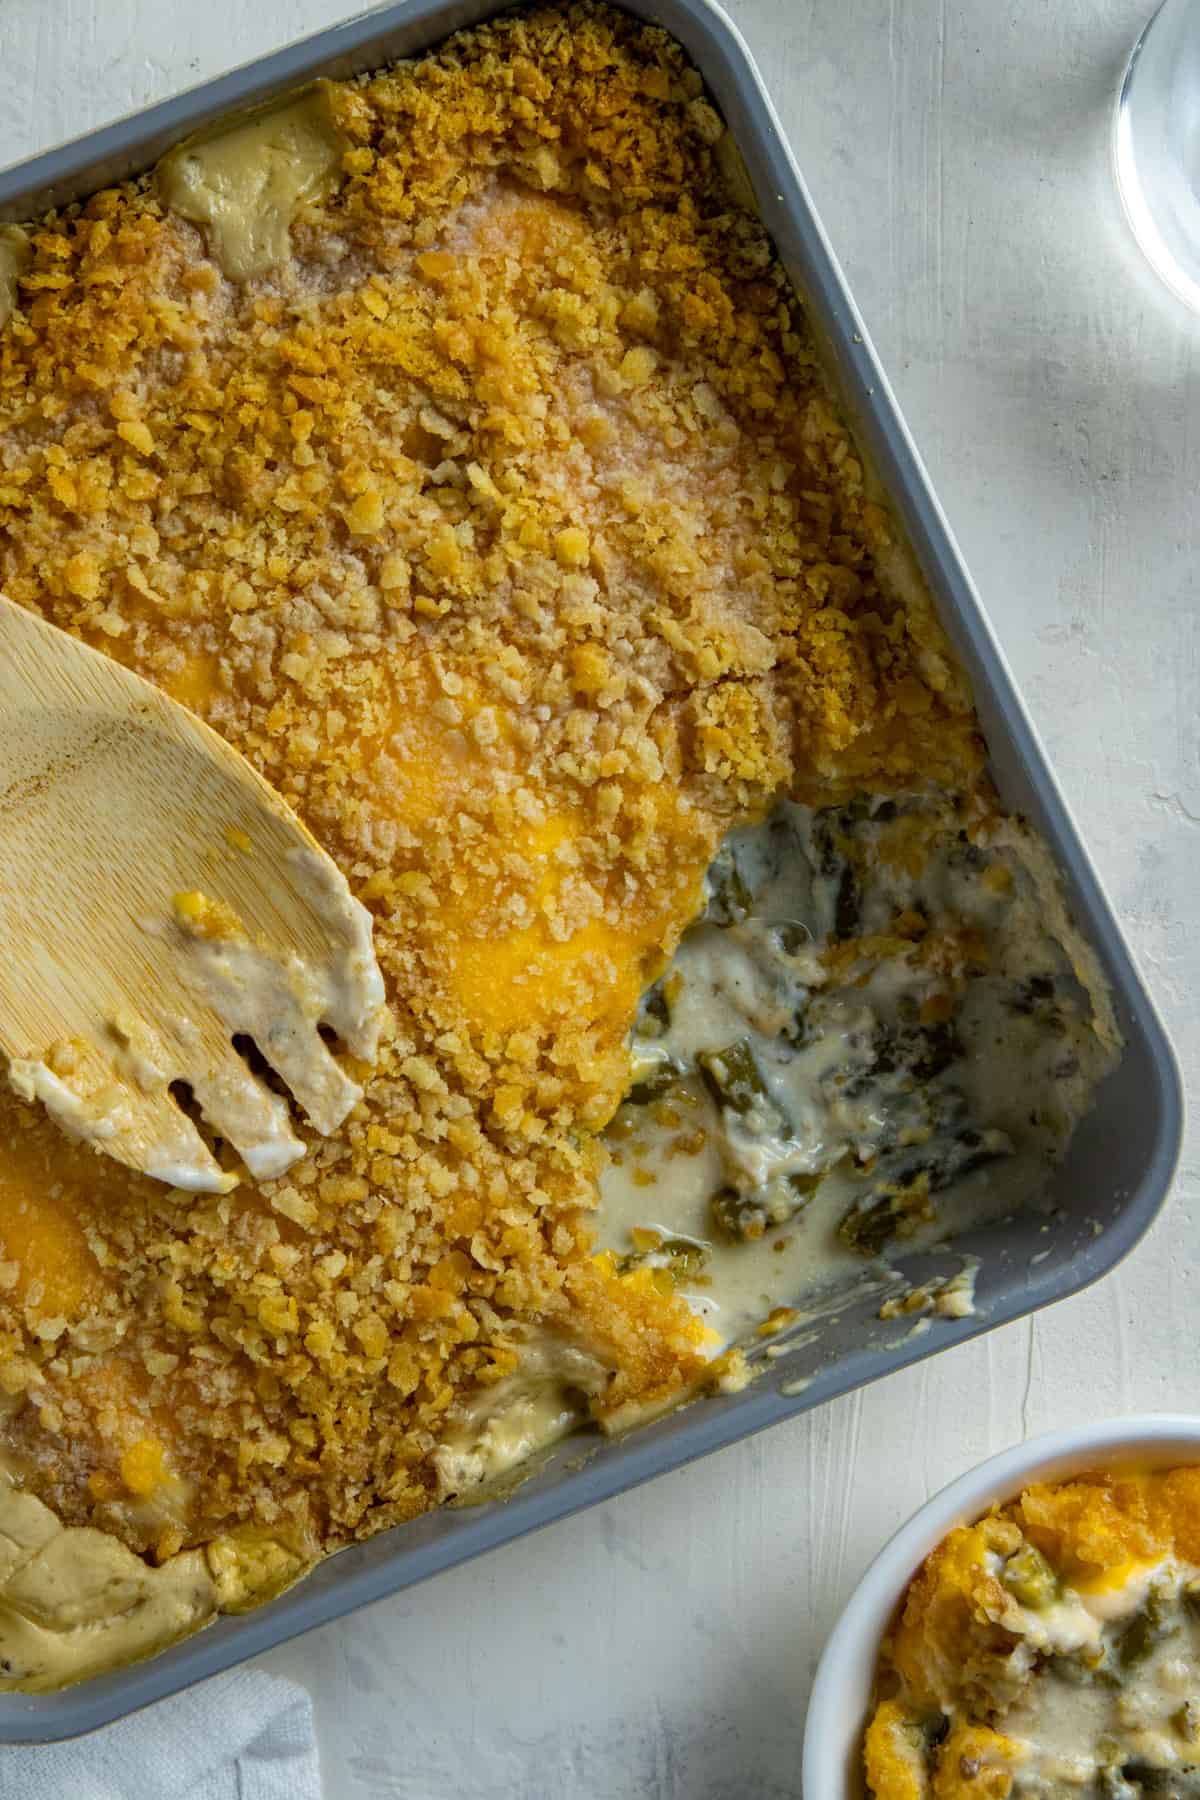 Cooked green bean casserole in square casserole dish with one serving removed. A wooden serving spoon is resting on top of the casserole.